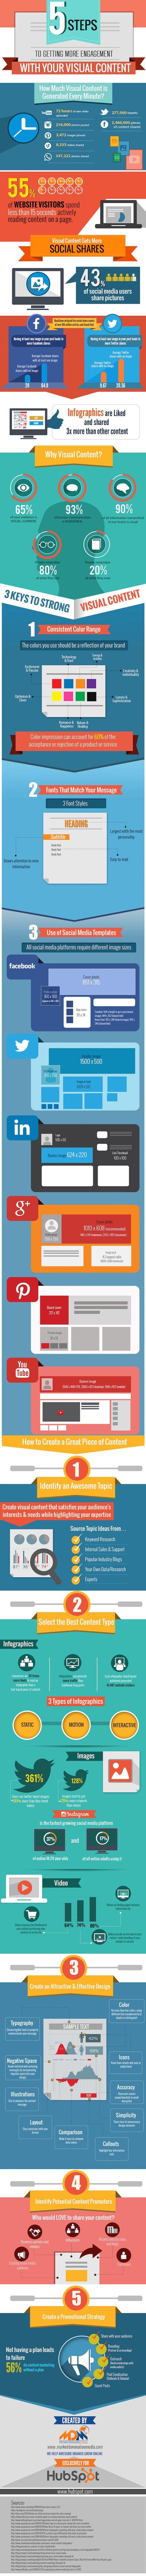 visual content engagement boost infographic